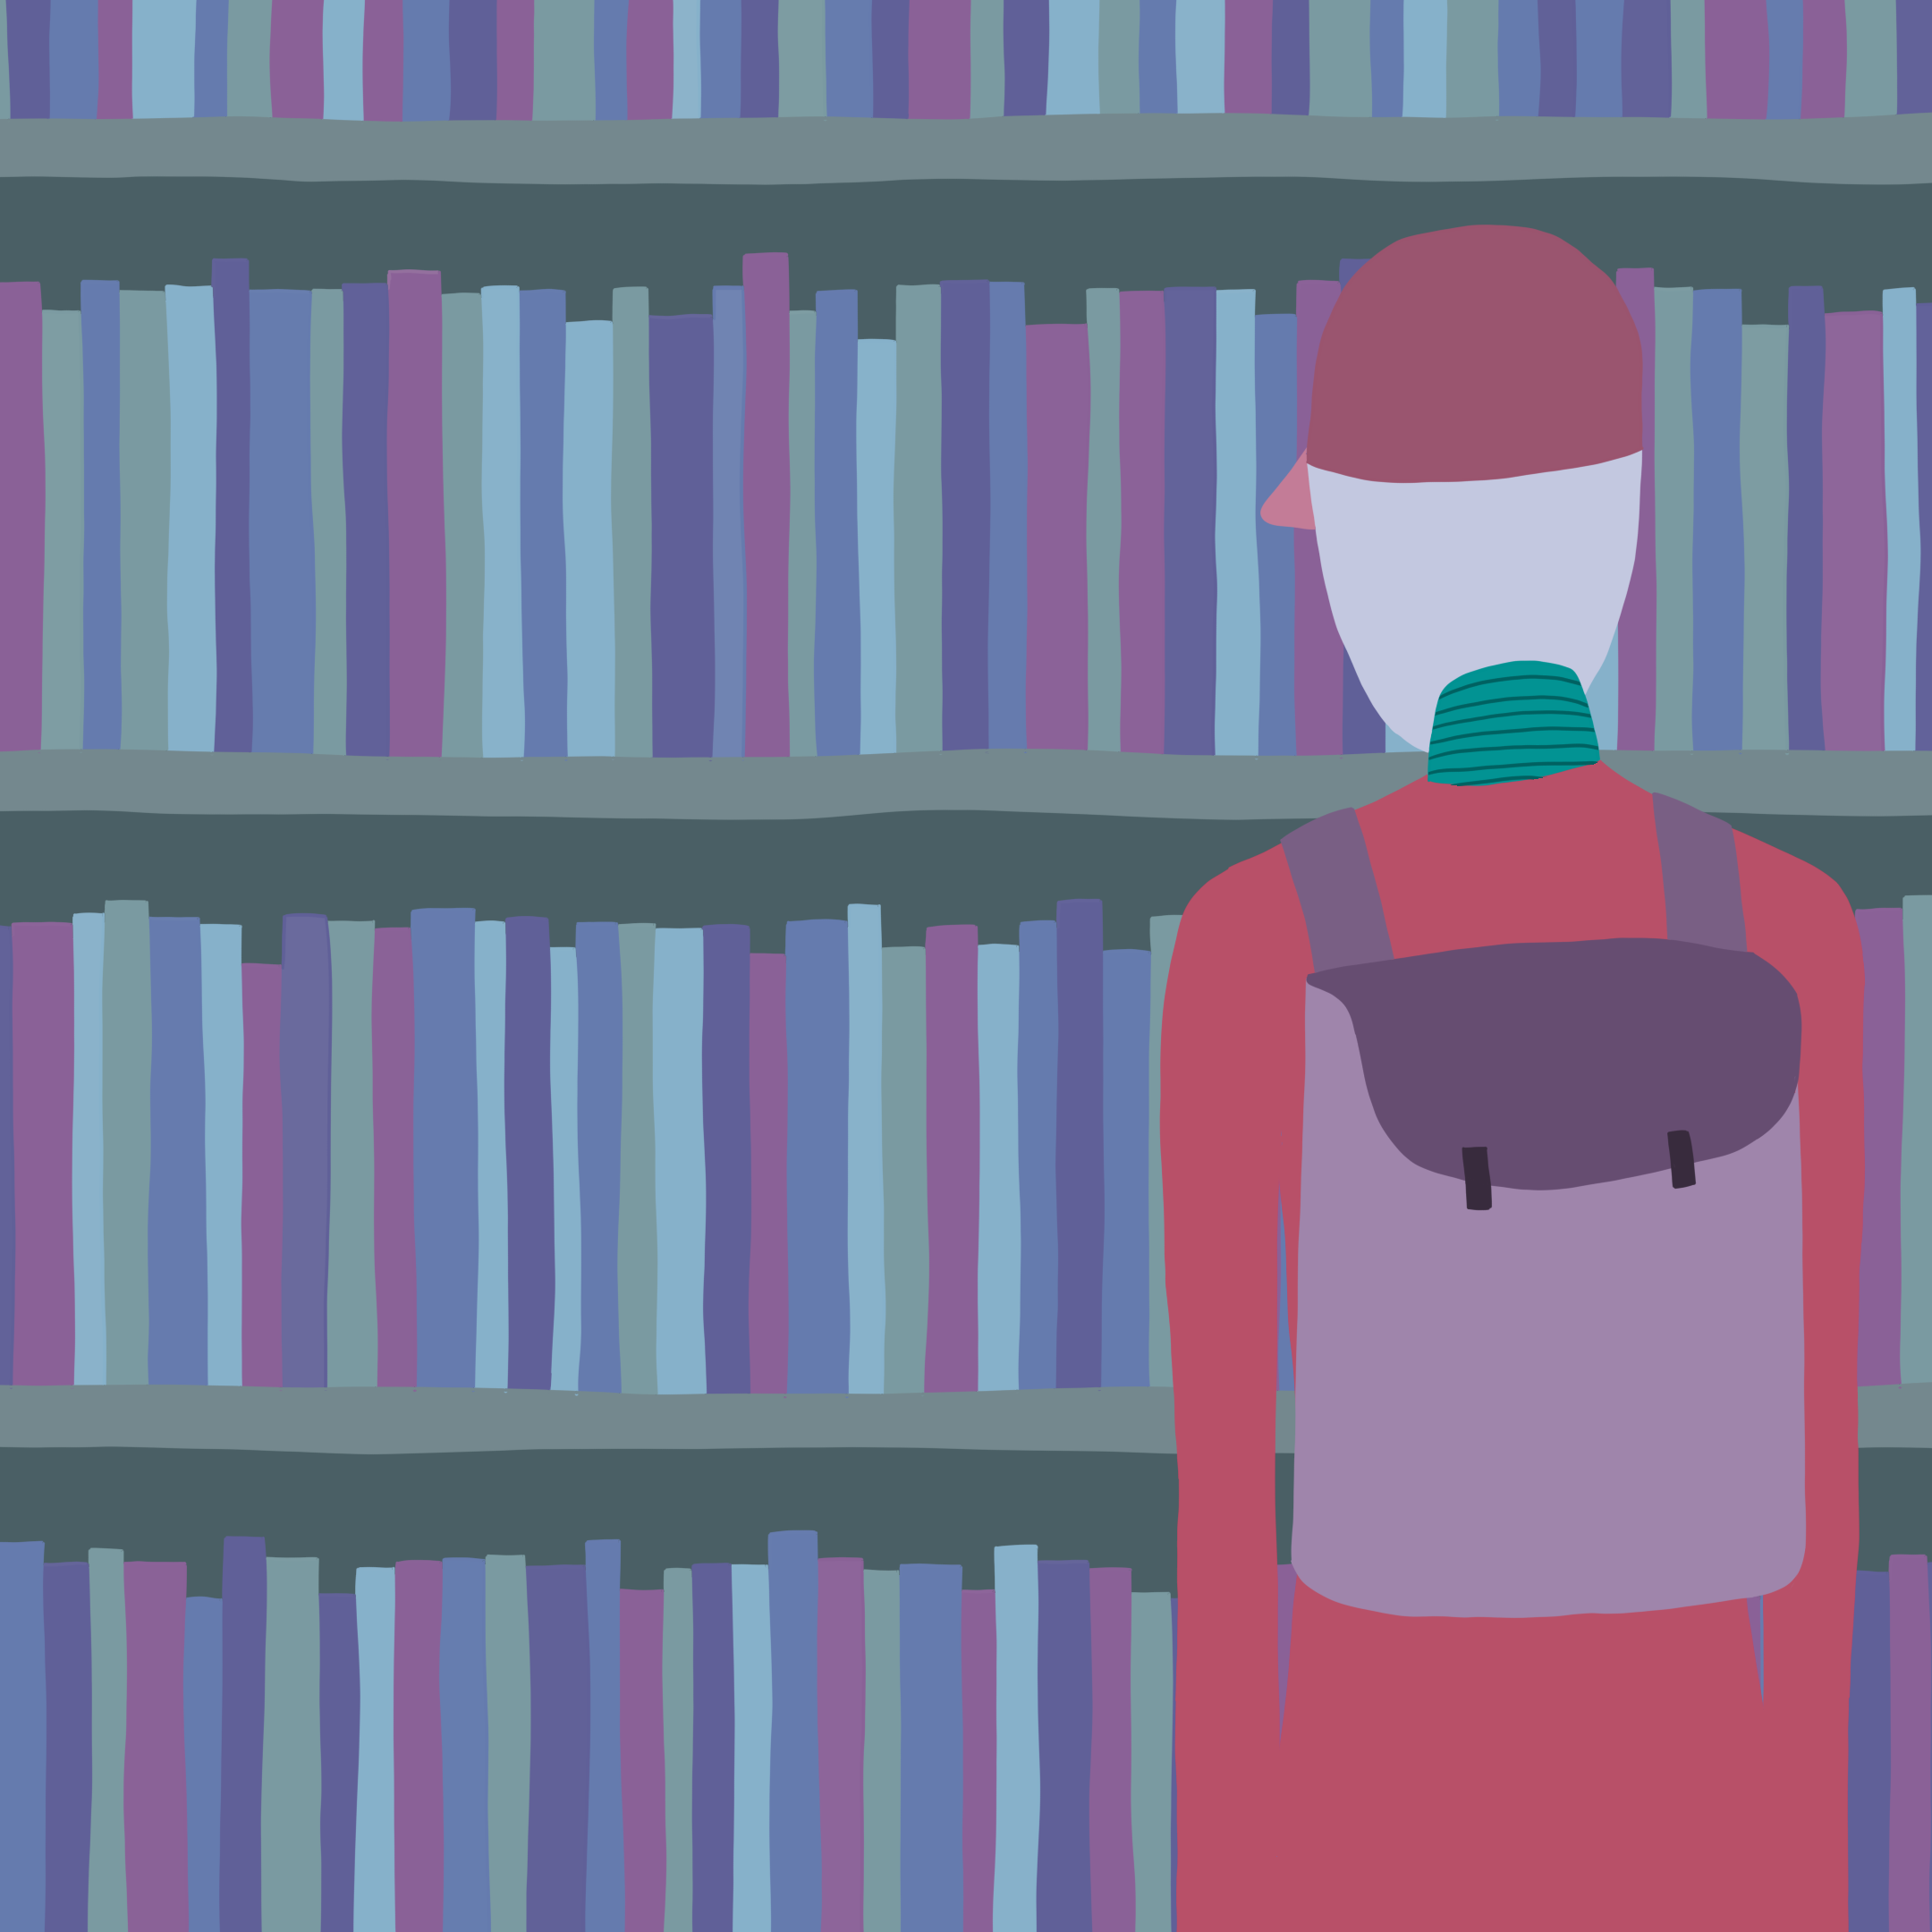 A robot named Rova standing in front of a shelf full of books.